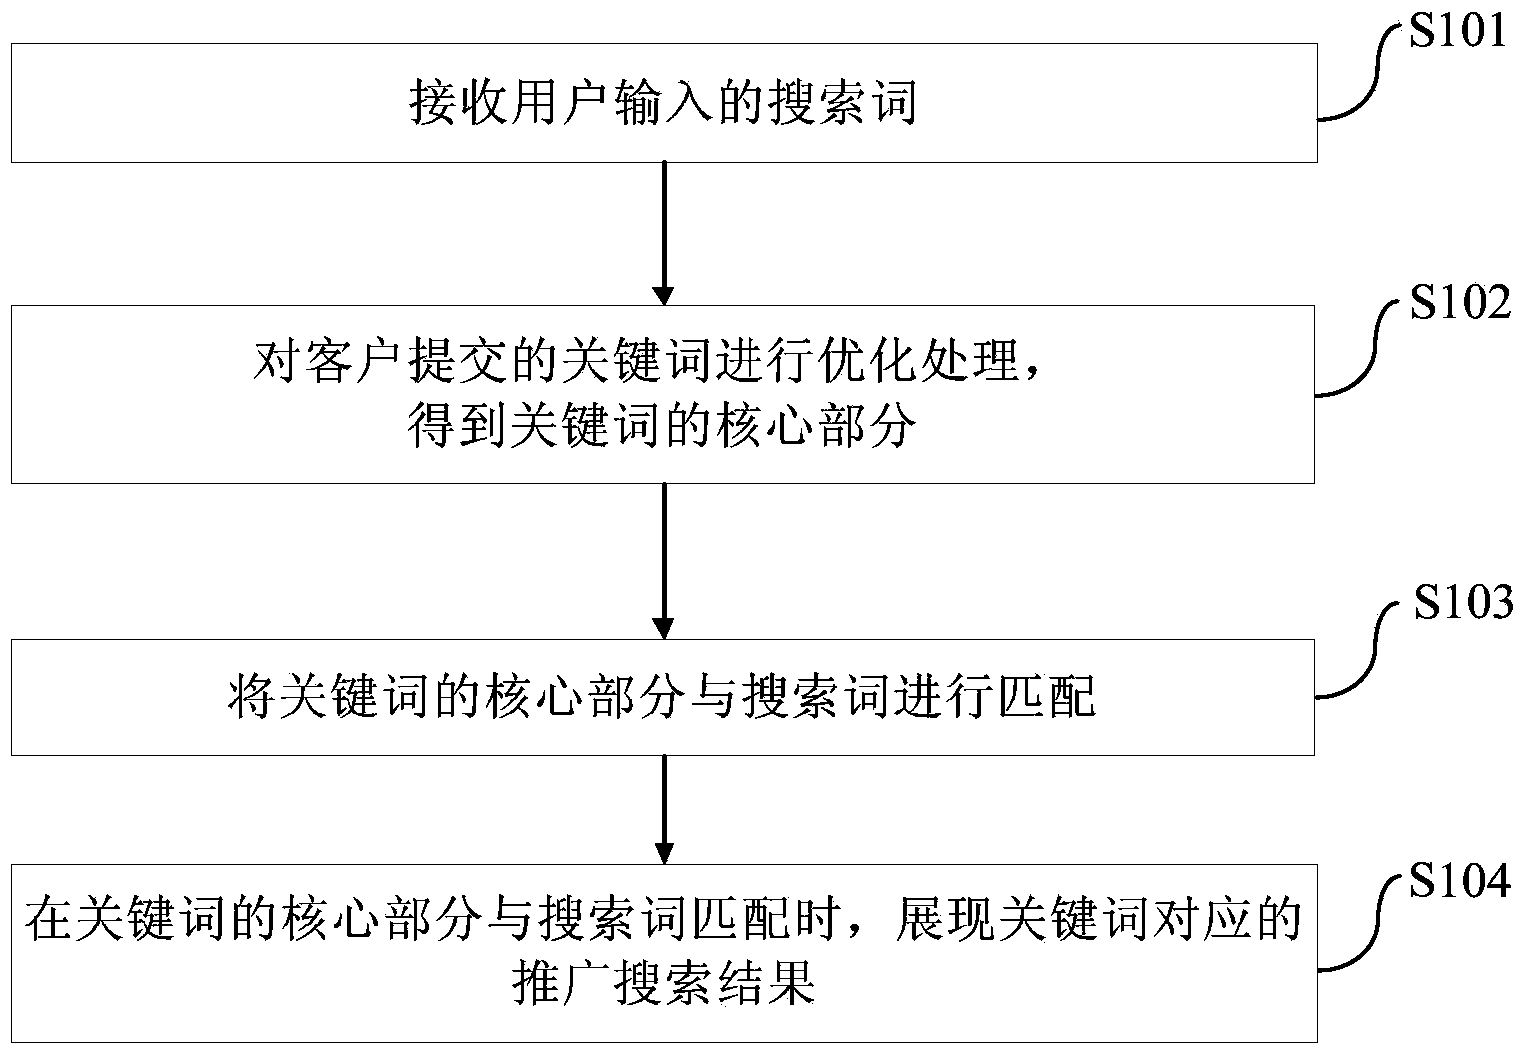 Promotion search result display method and device